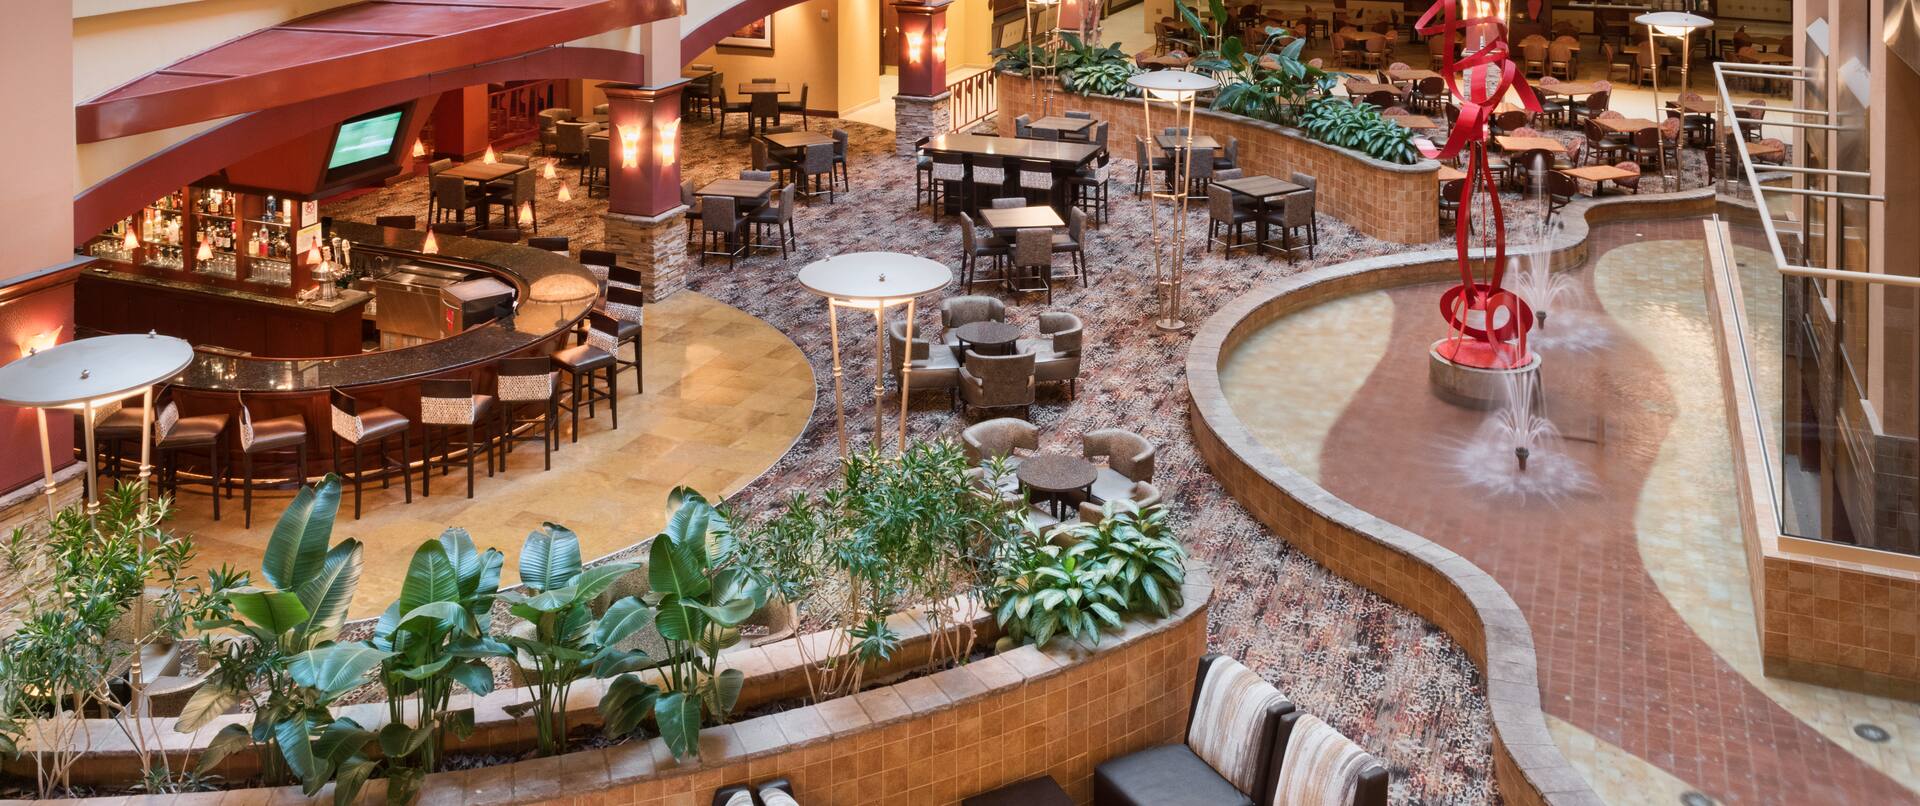 Overview of Atrium Lobby with Bar and Seating Areas